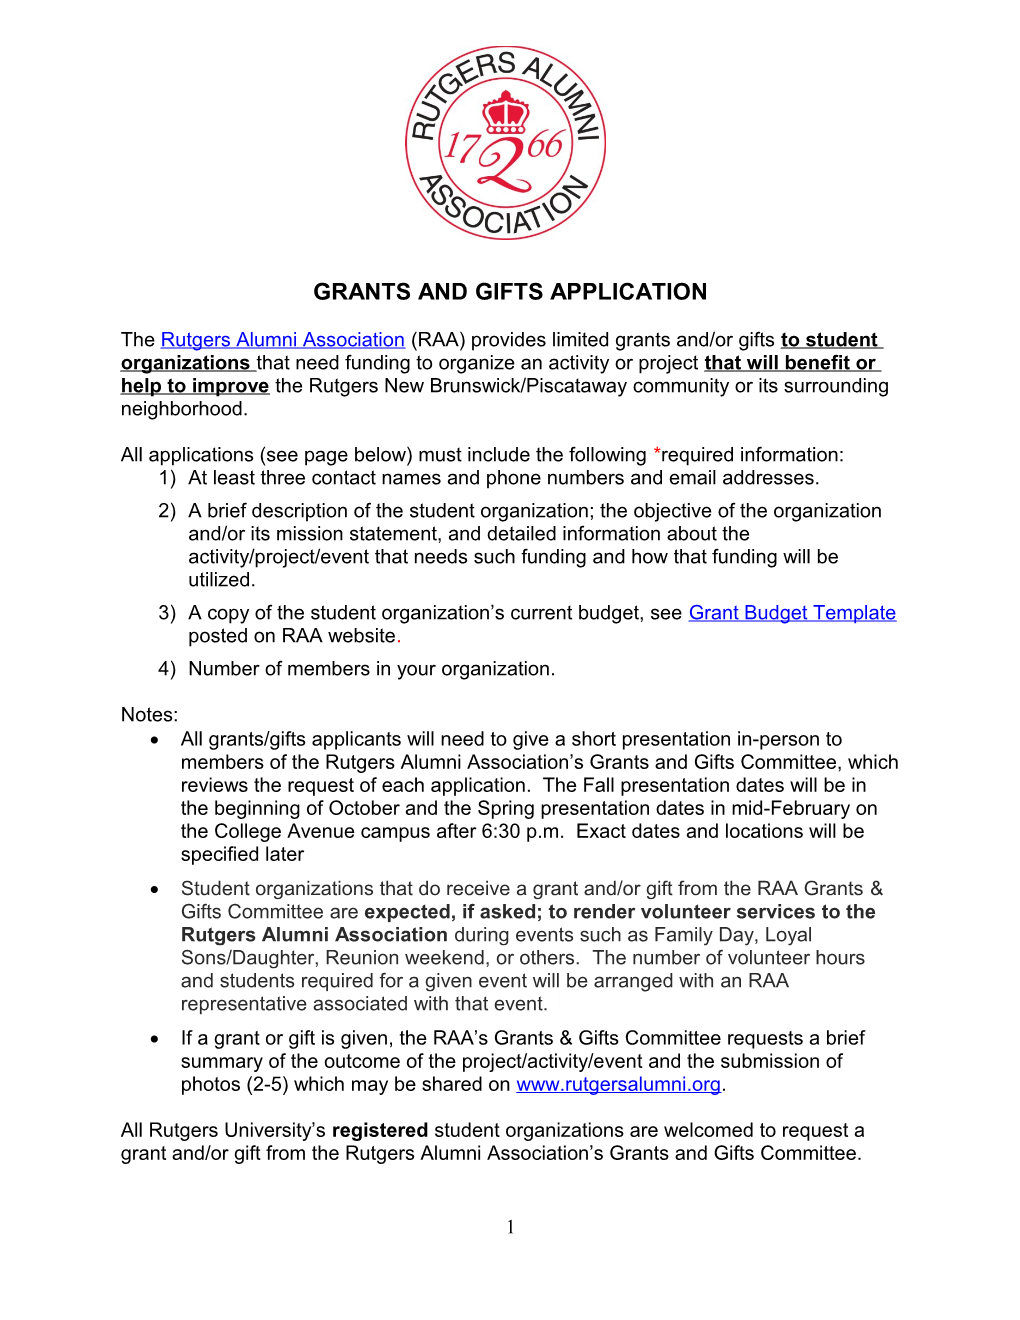 Grants and Gifts Application